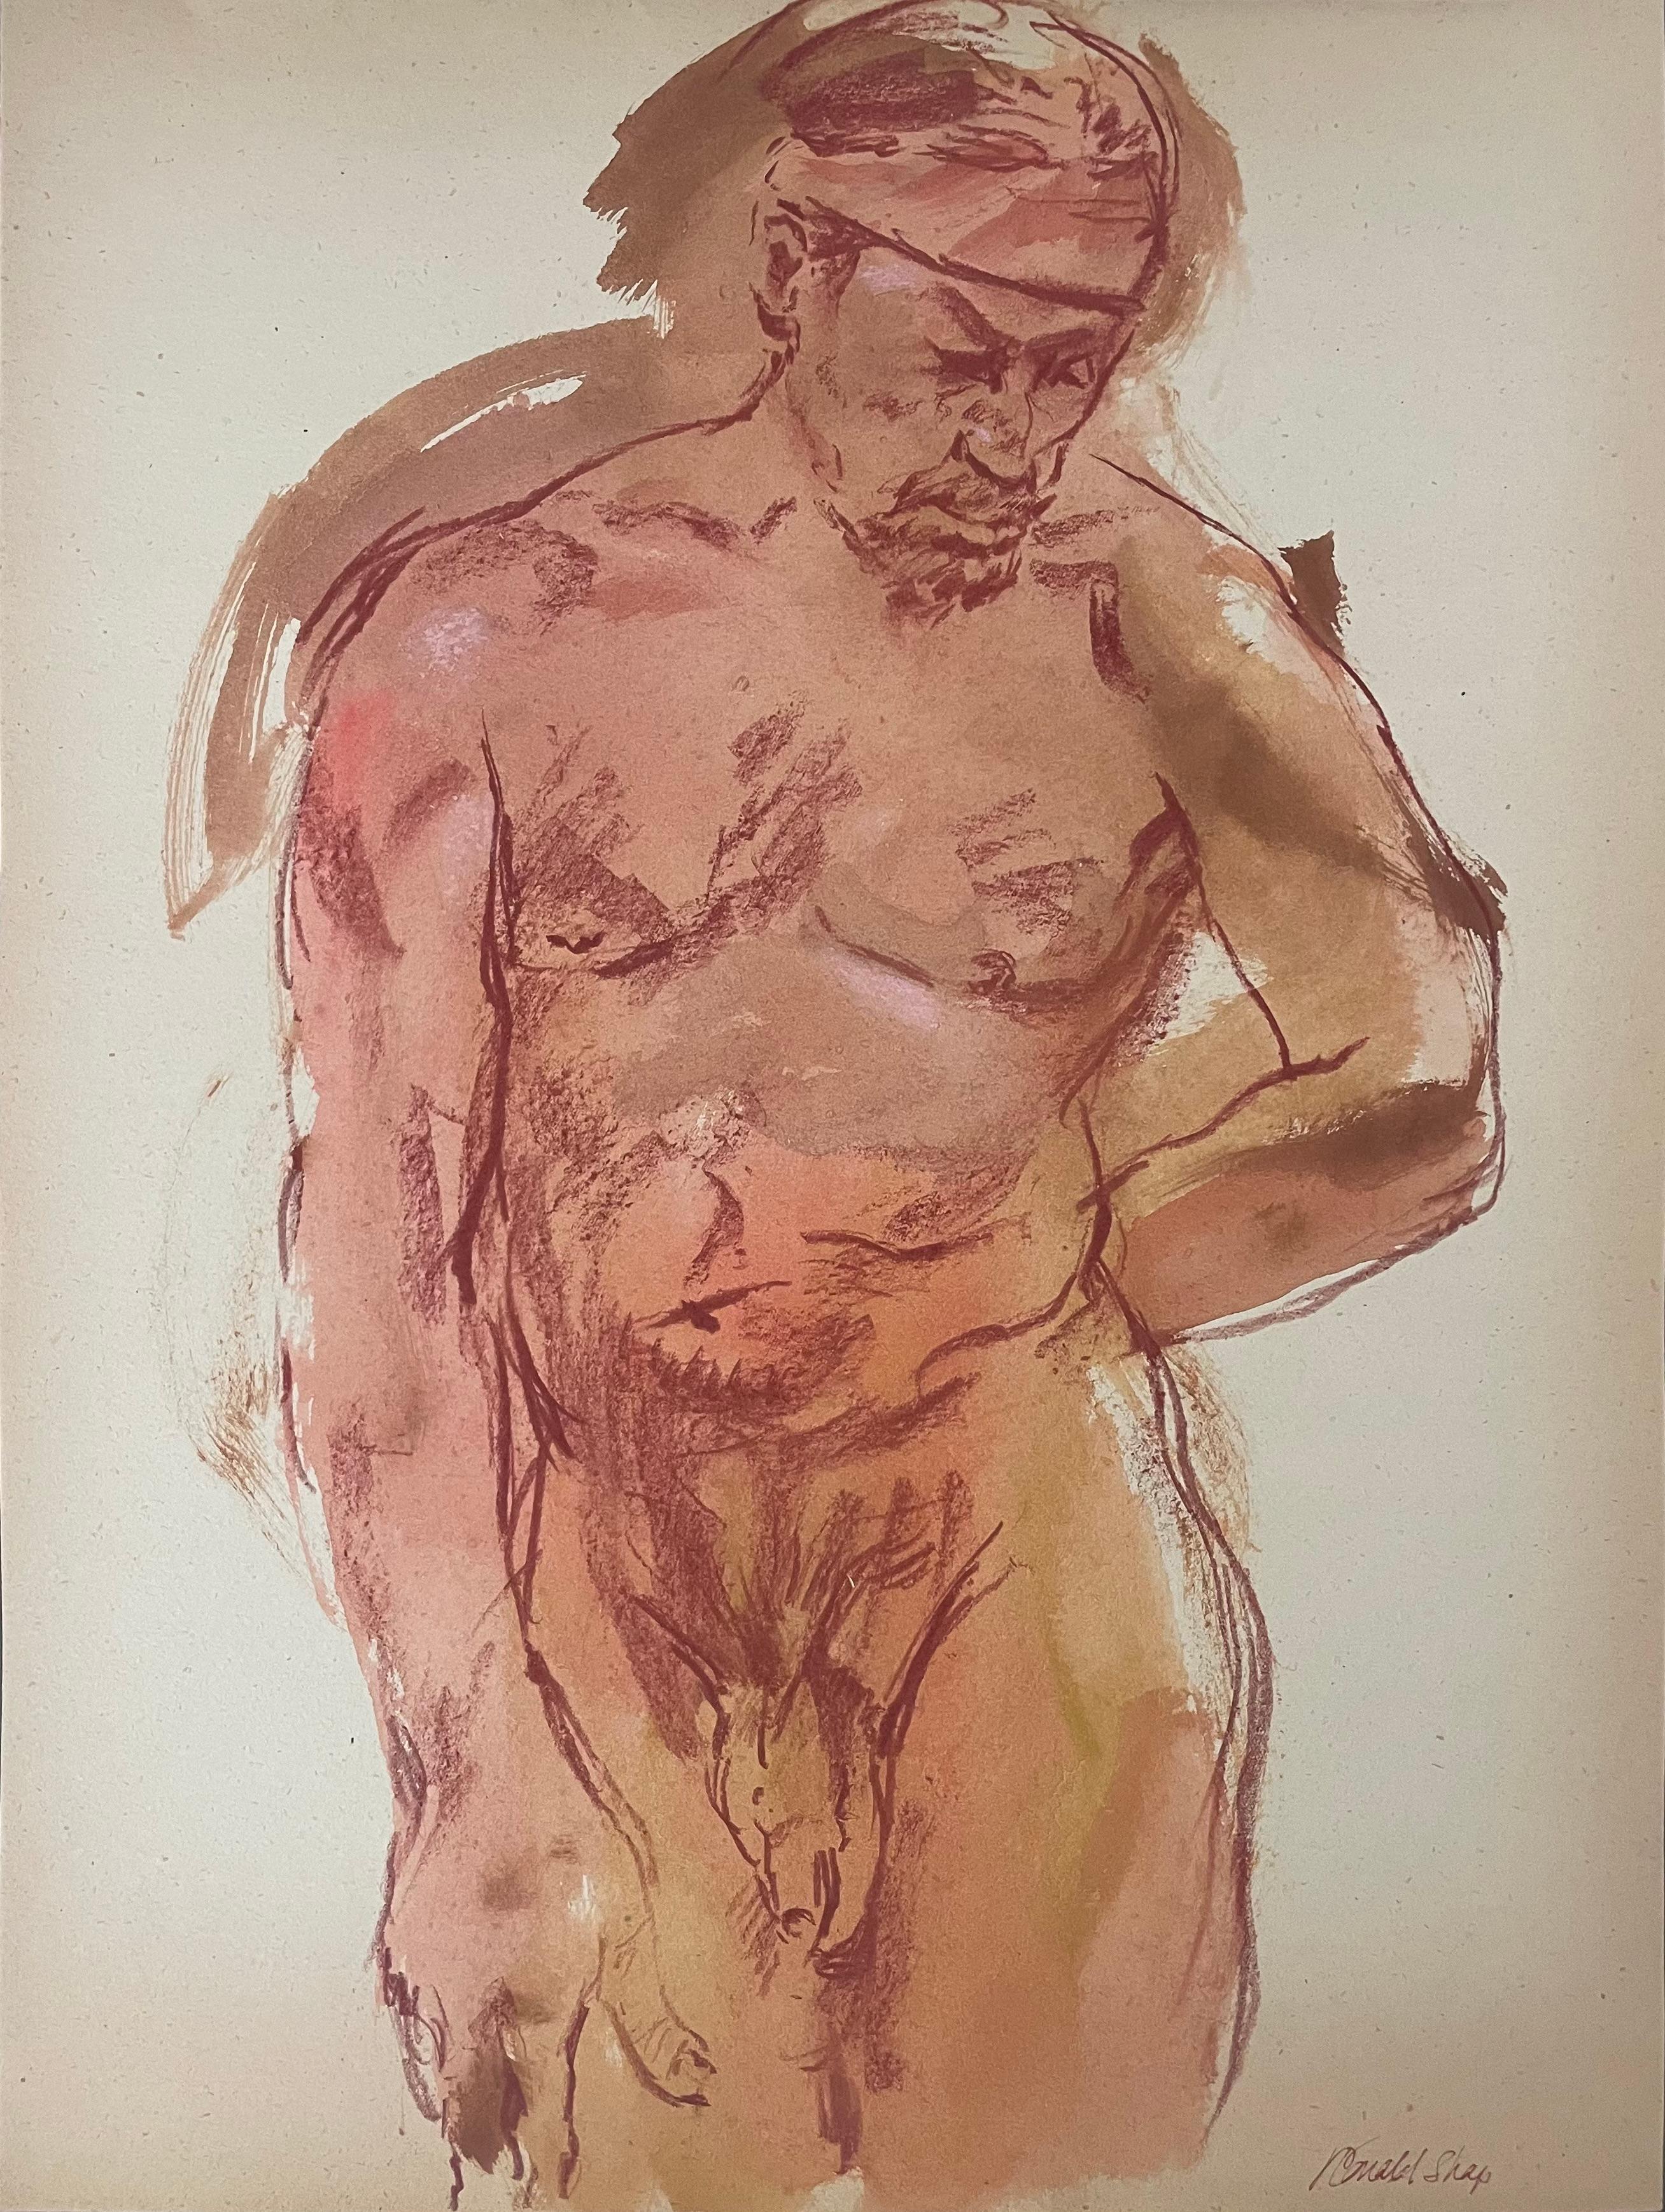 Original oil pastel and gouache figure drawing by celebrated, twentieth-century California landscape painter, Ronald Shap. Sketch of a nude man with a bandana in tones of brown and accents of pink. 24x18 inches. Signed. 

No flaws to note.

Ronald